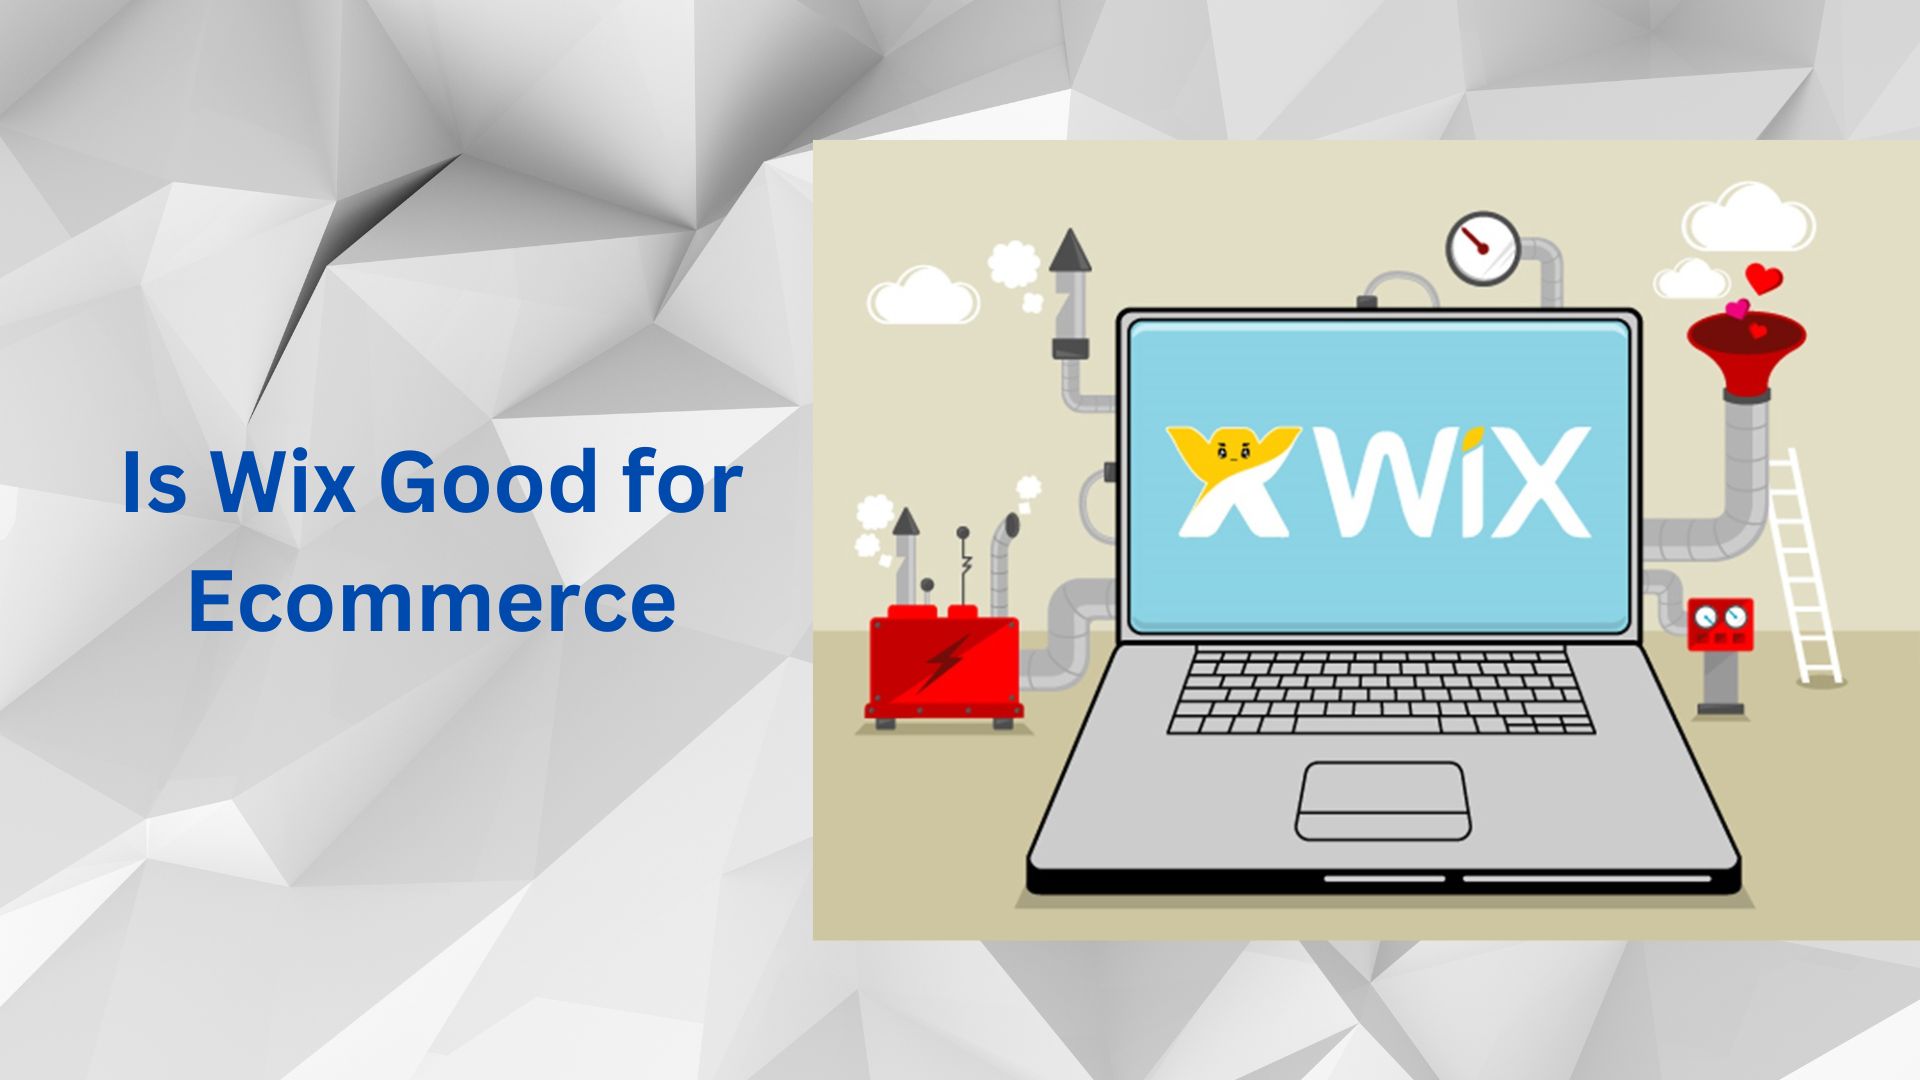 Is Wix Good for Ecommerce